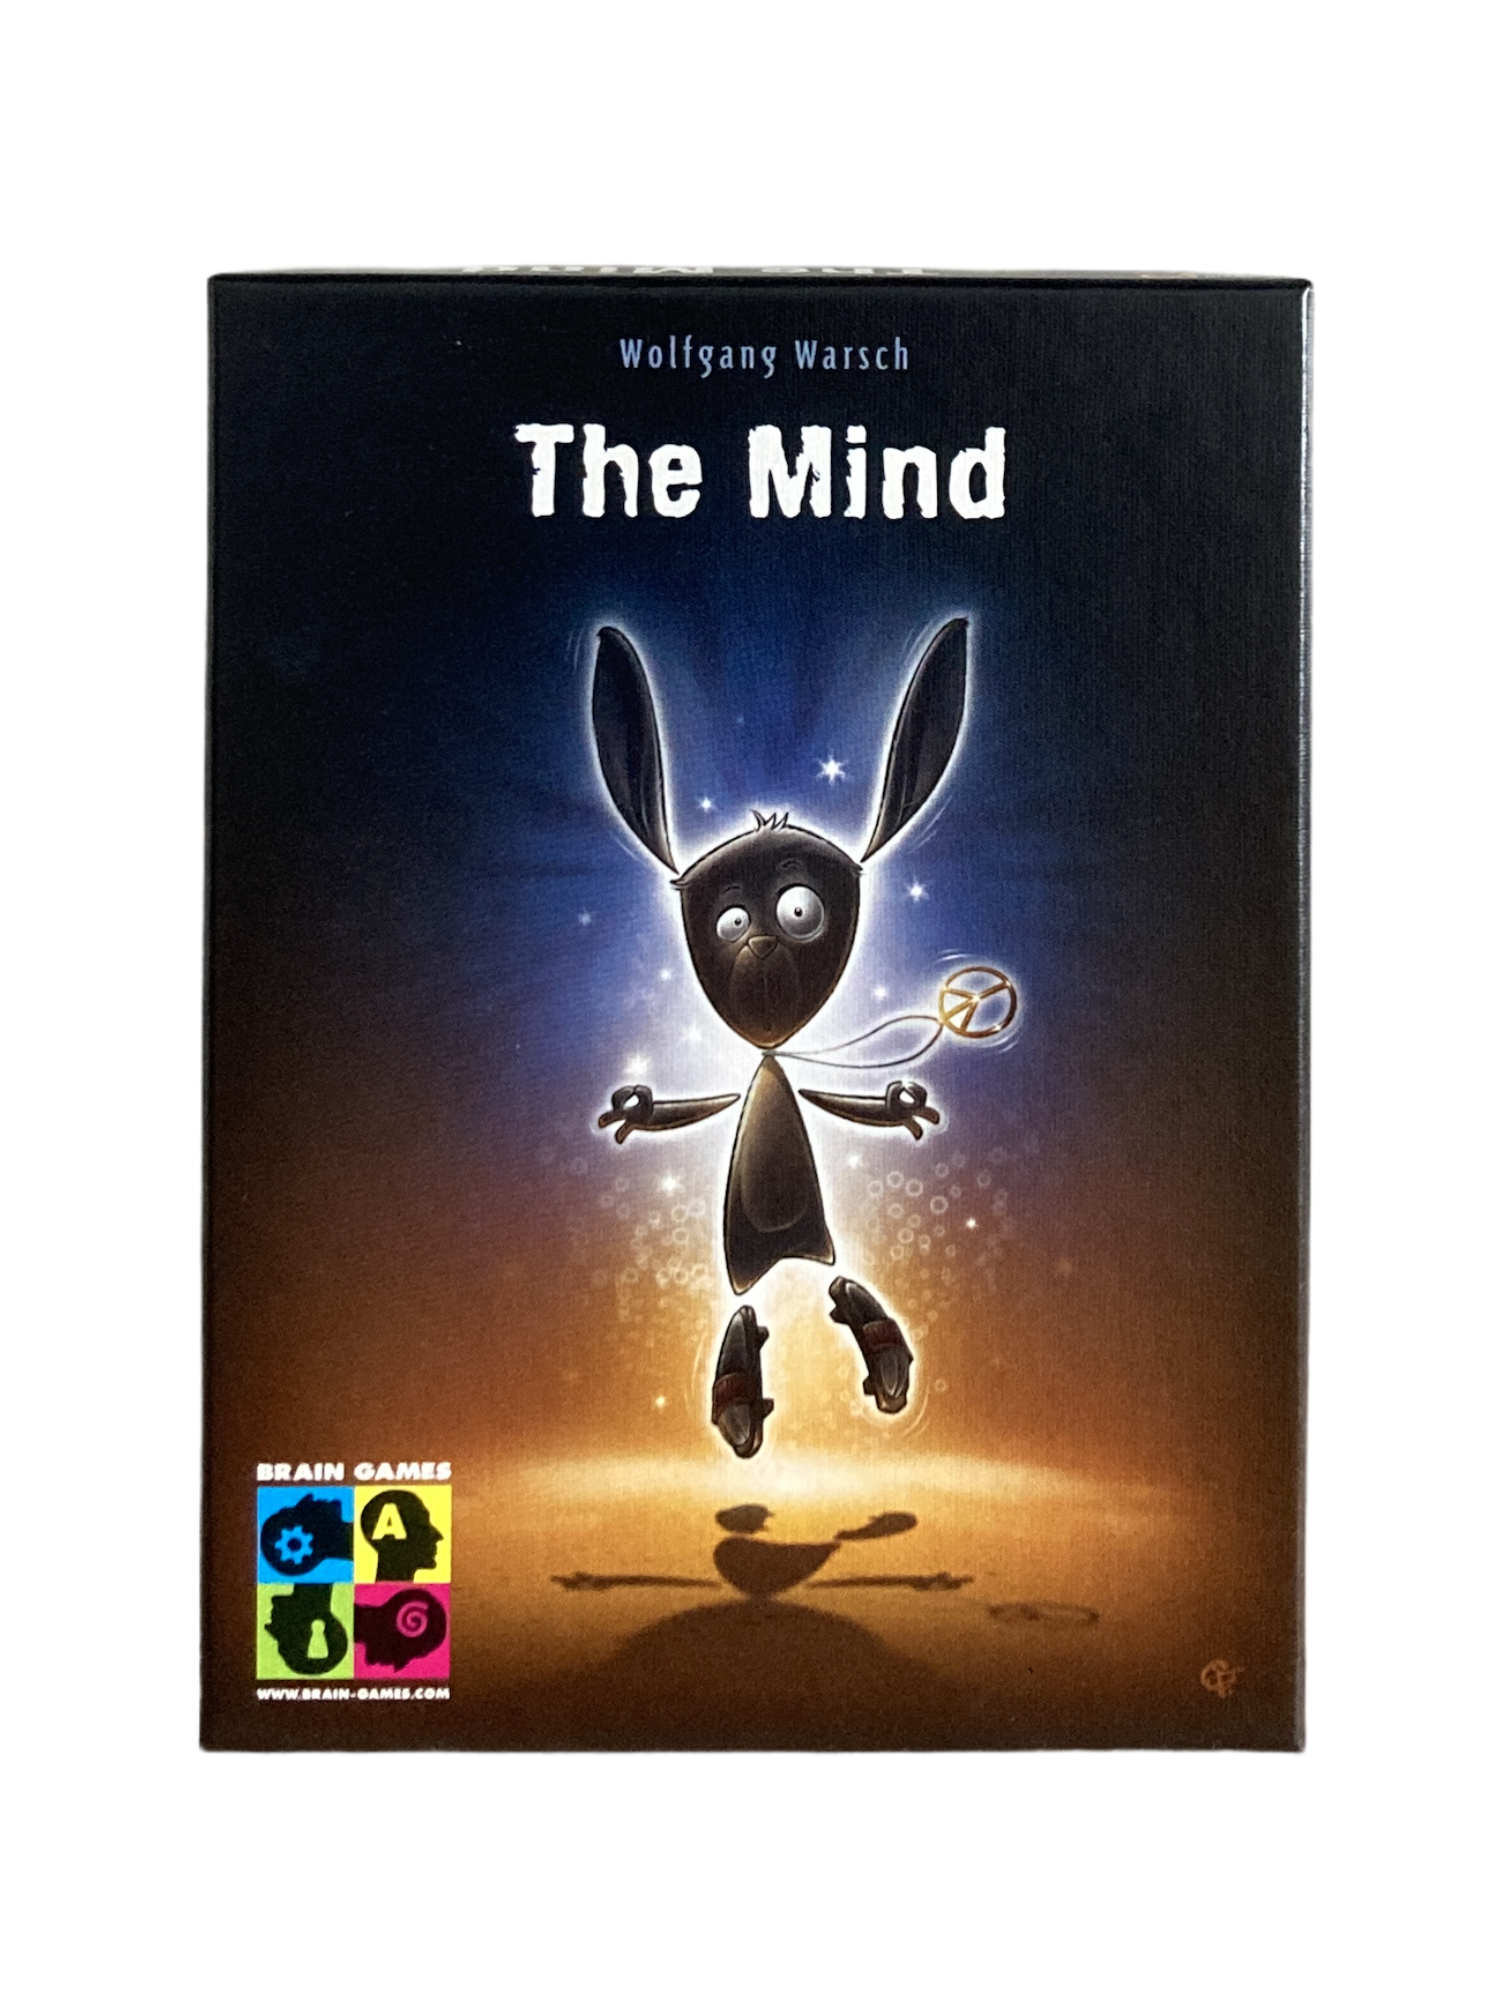 The Mind, Card games